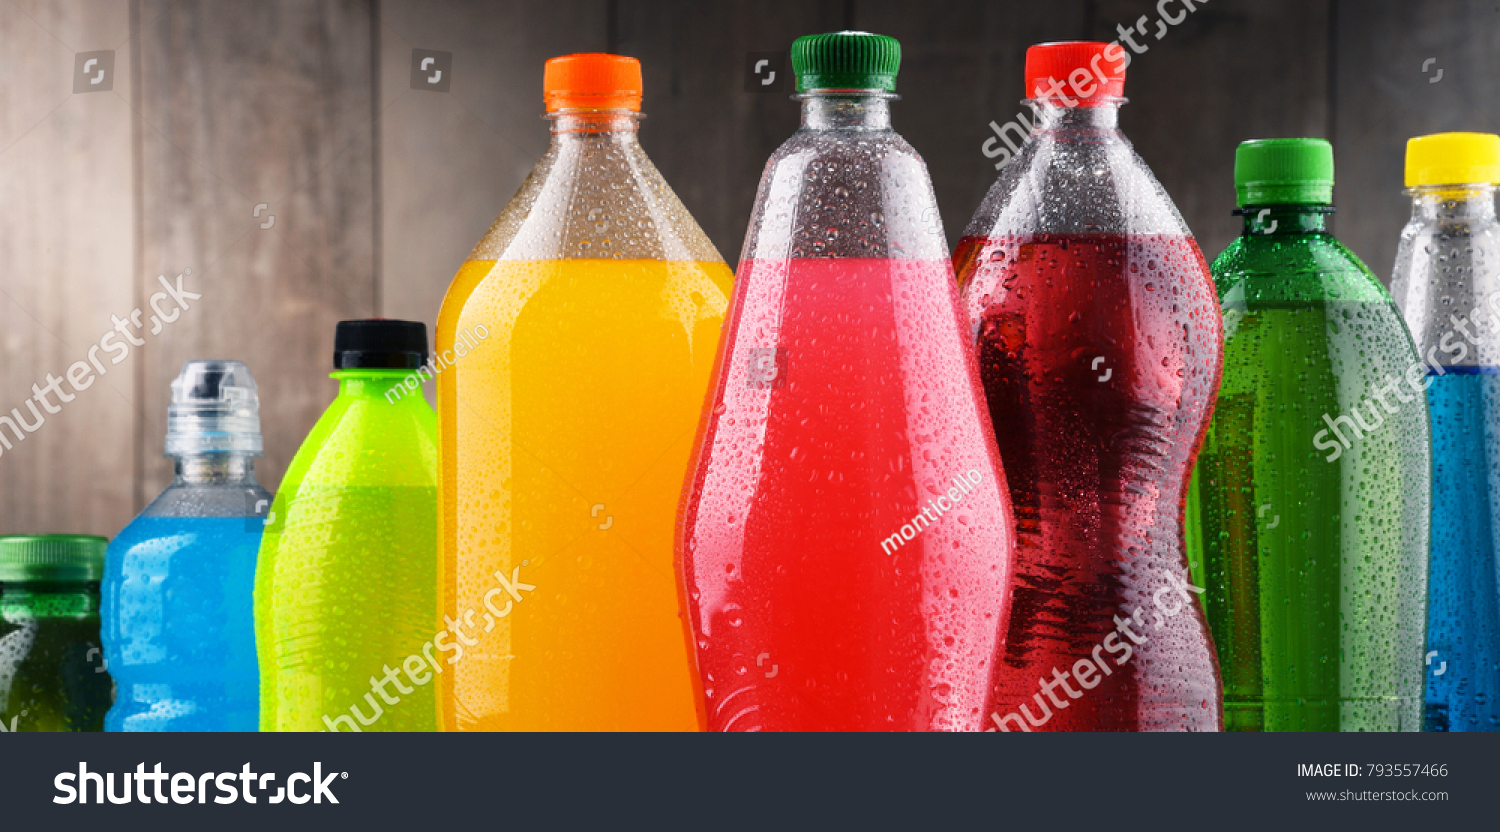 Plastic bottles of assorted carbonated soft drinks in variety of colors #793557466